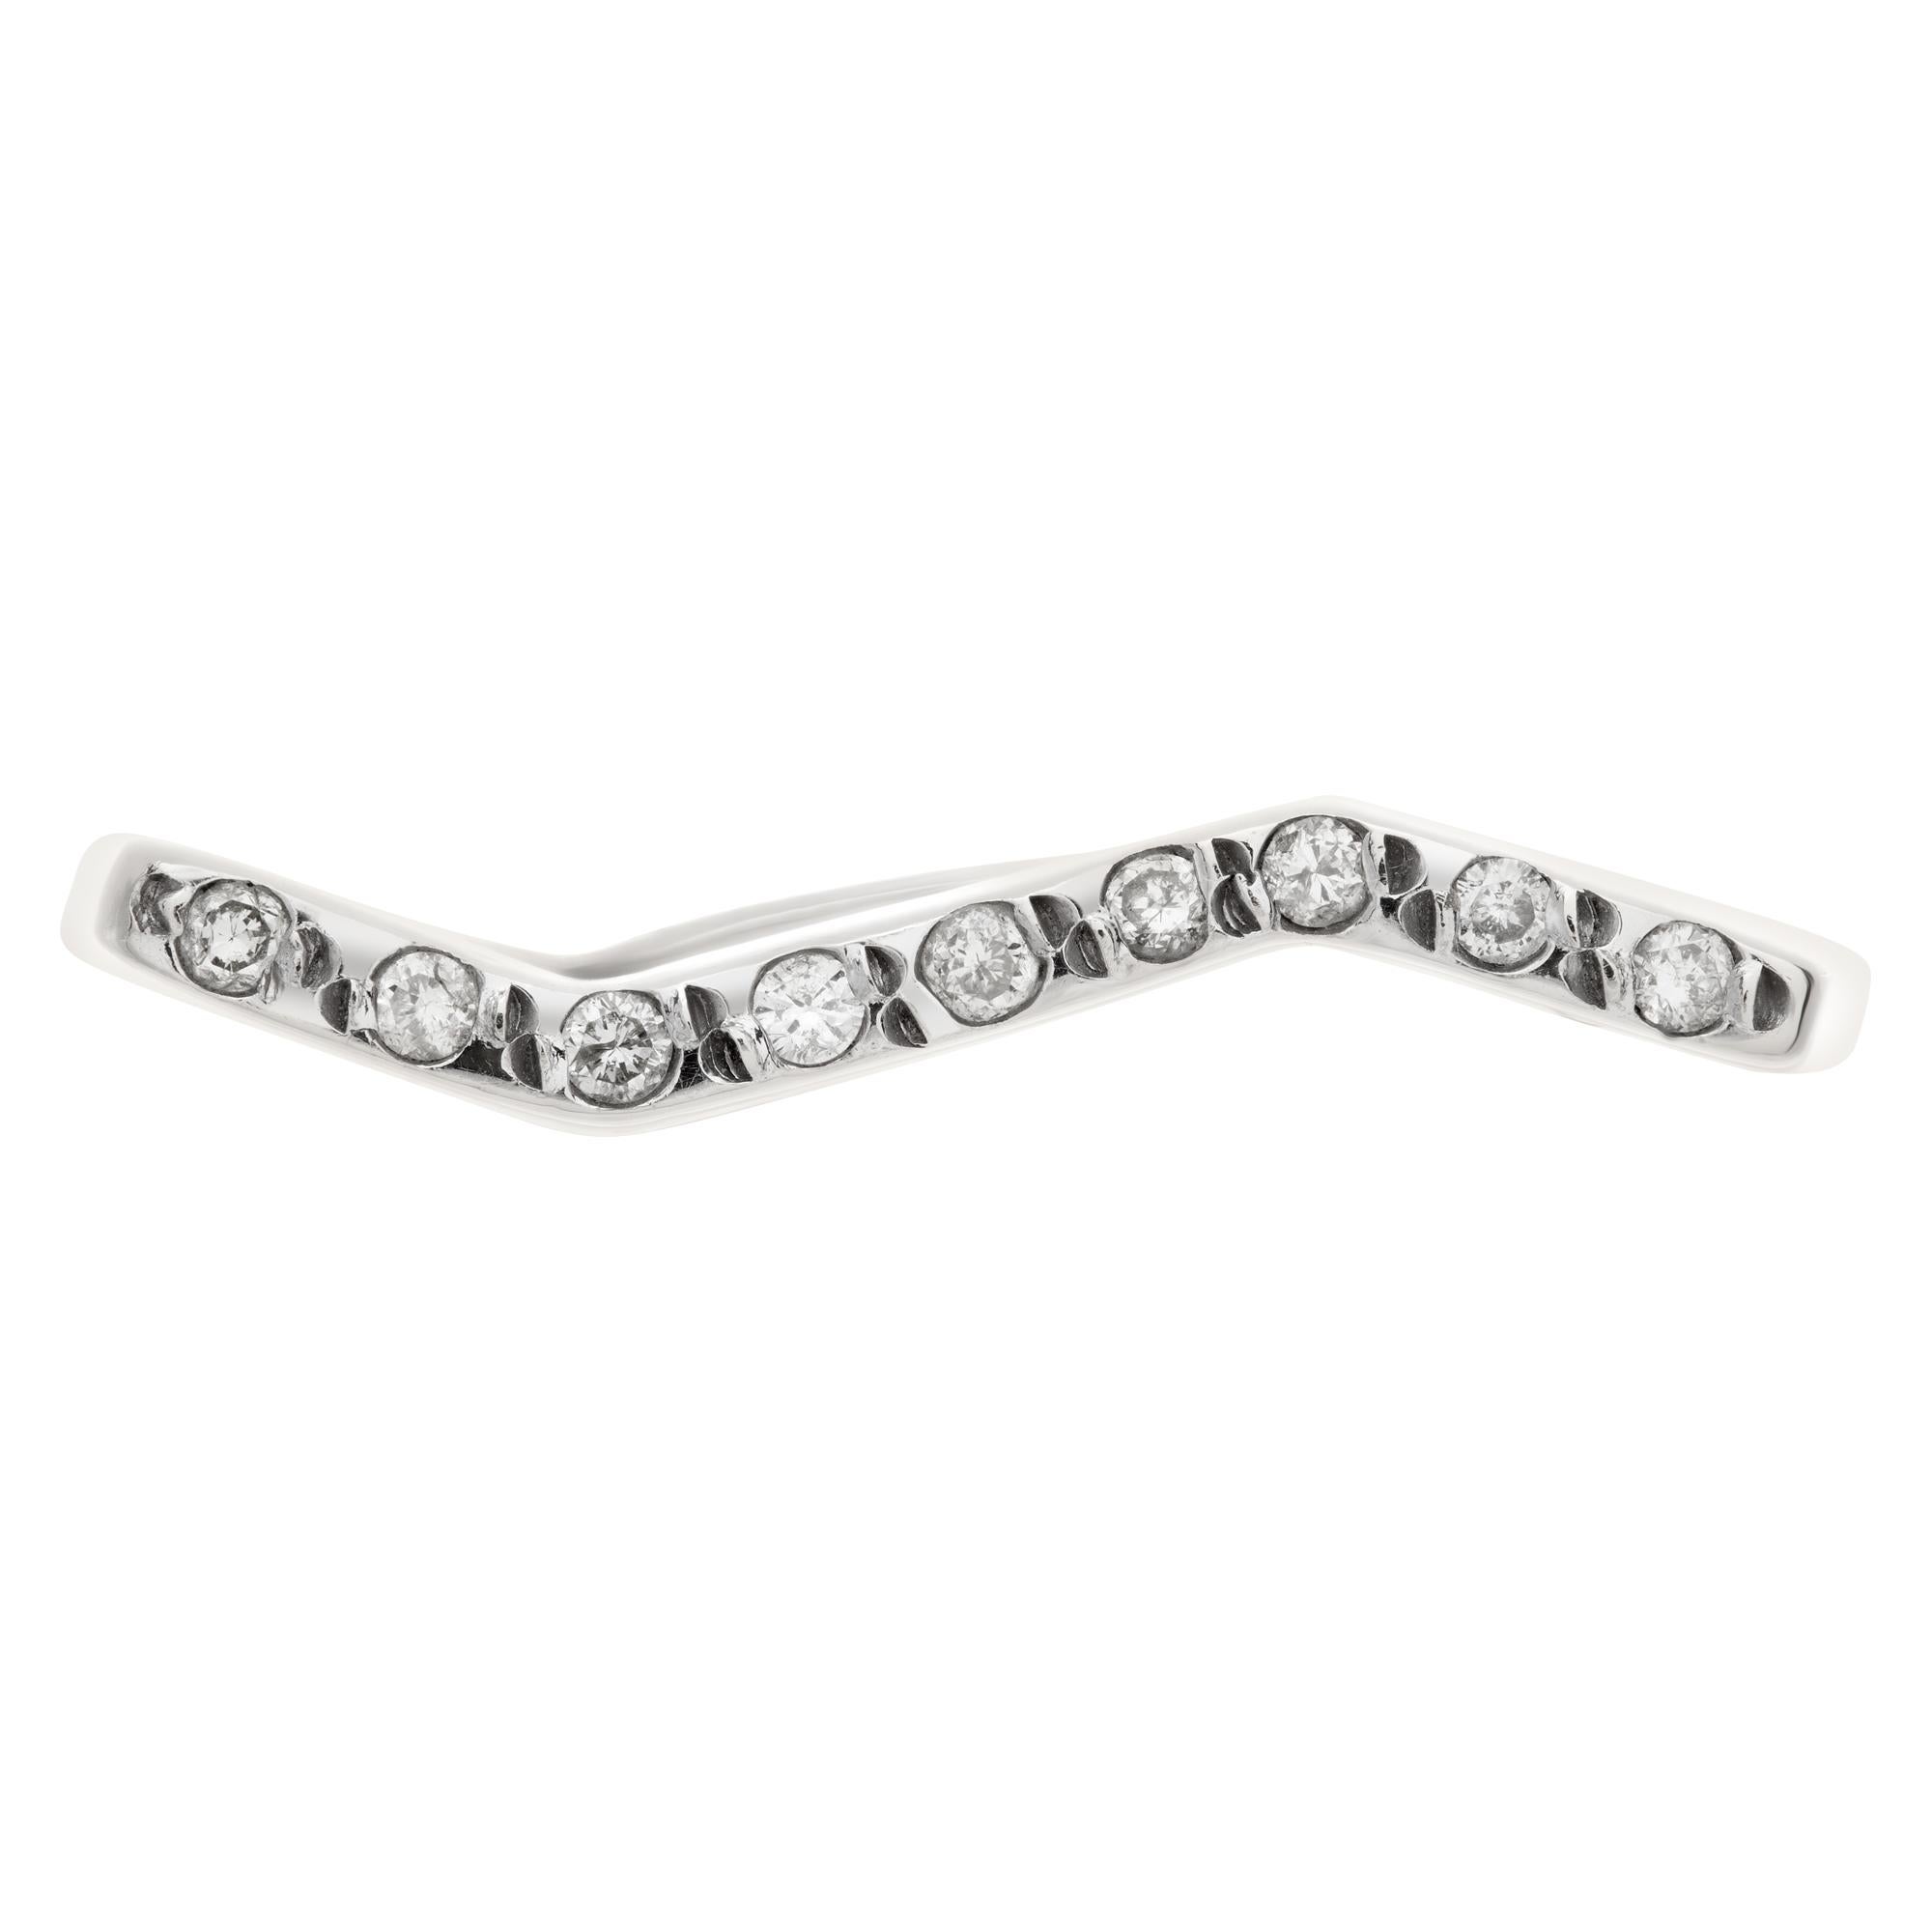 Zig-zag diamond line ring in 18k white gold, app. 0.10 carats in round diamonds. Size 8.This Diamond ring is currently size 8 and some items can be sized up or down, please ask! It weighs 2.6 pennyweights and is 18k.